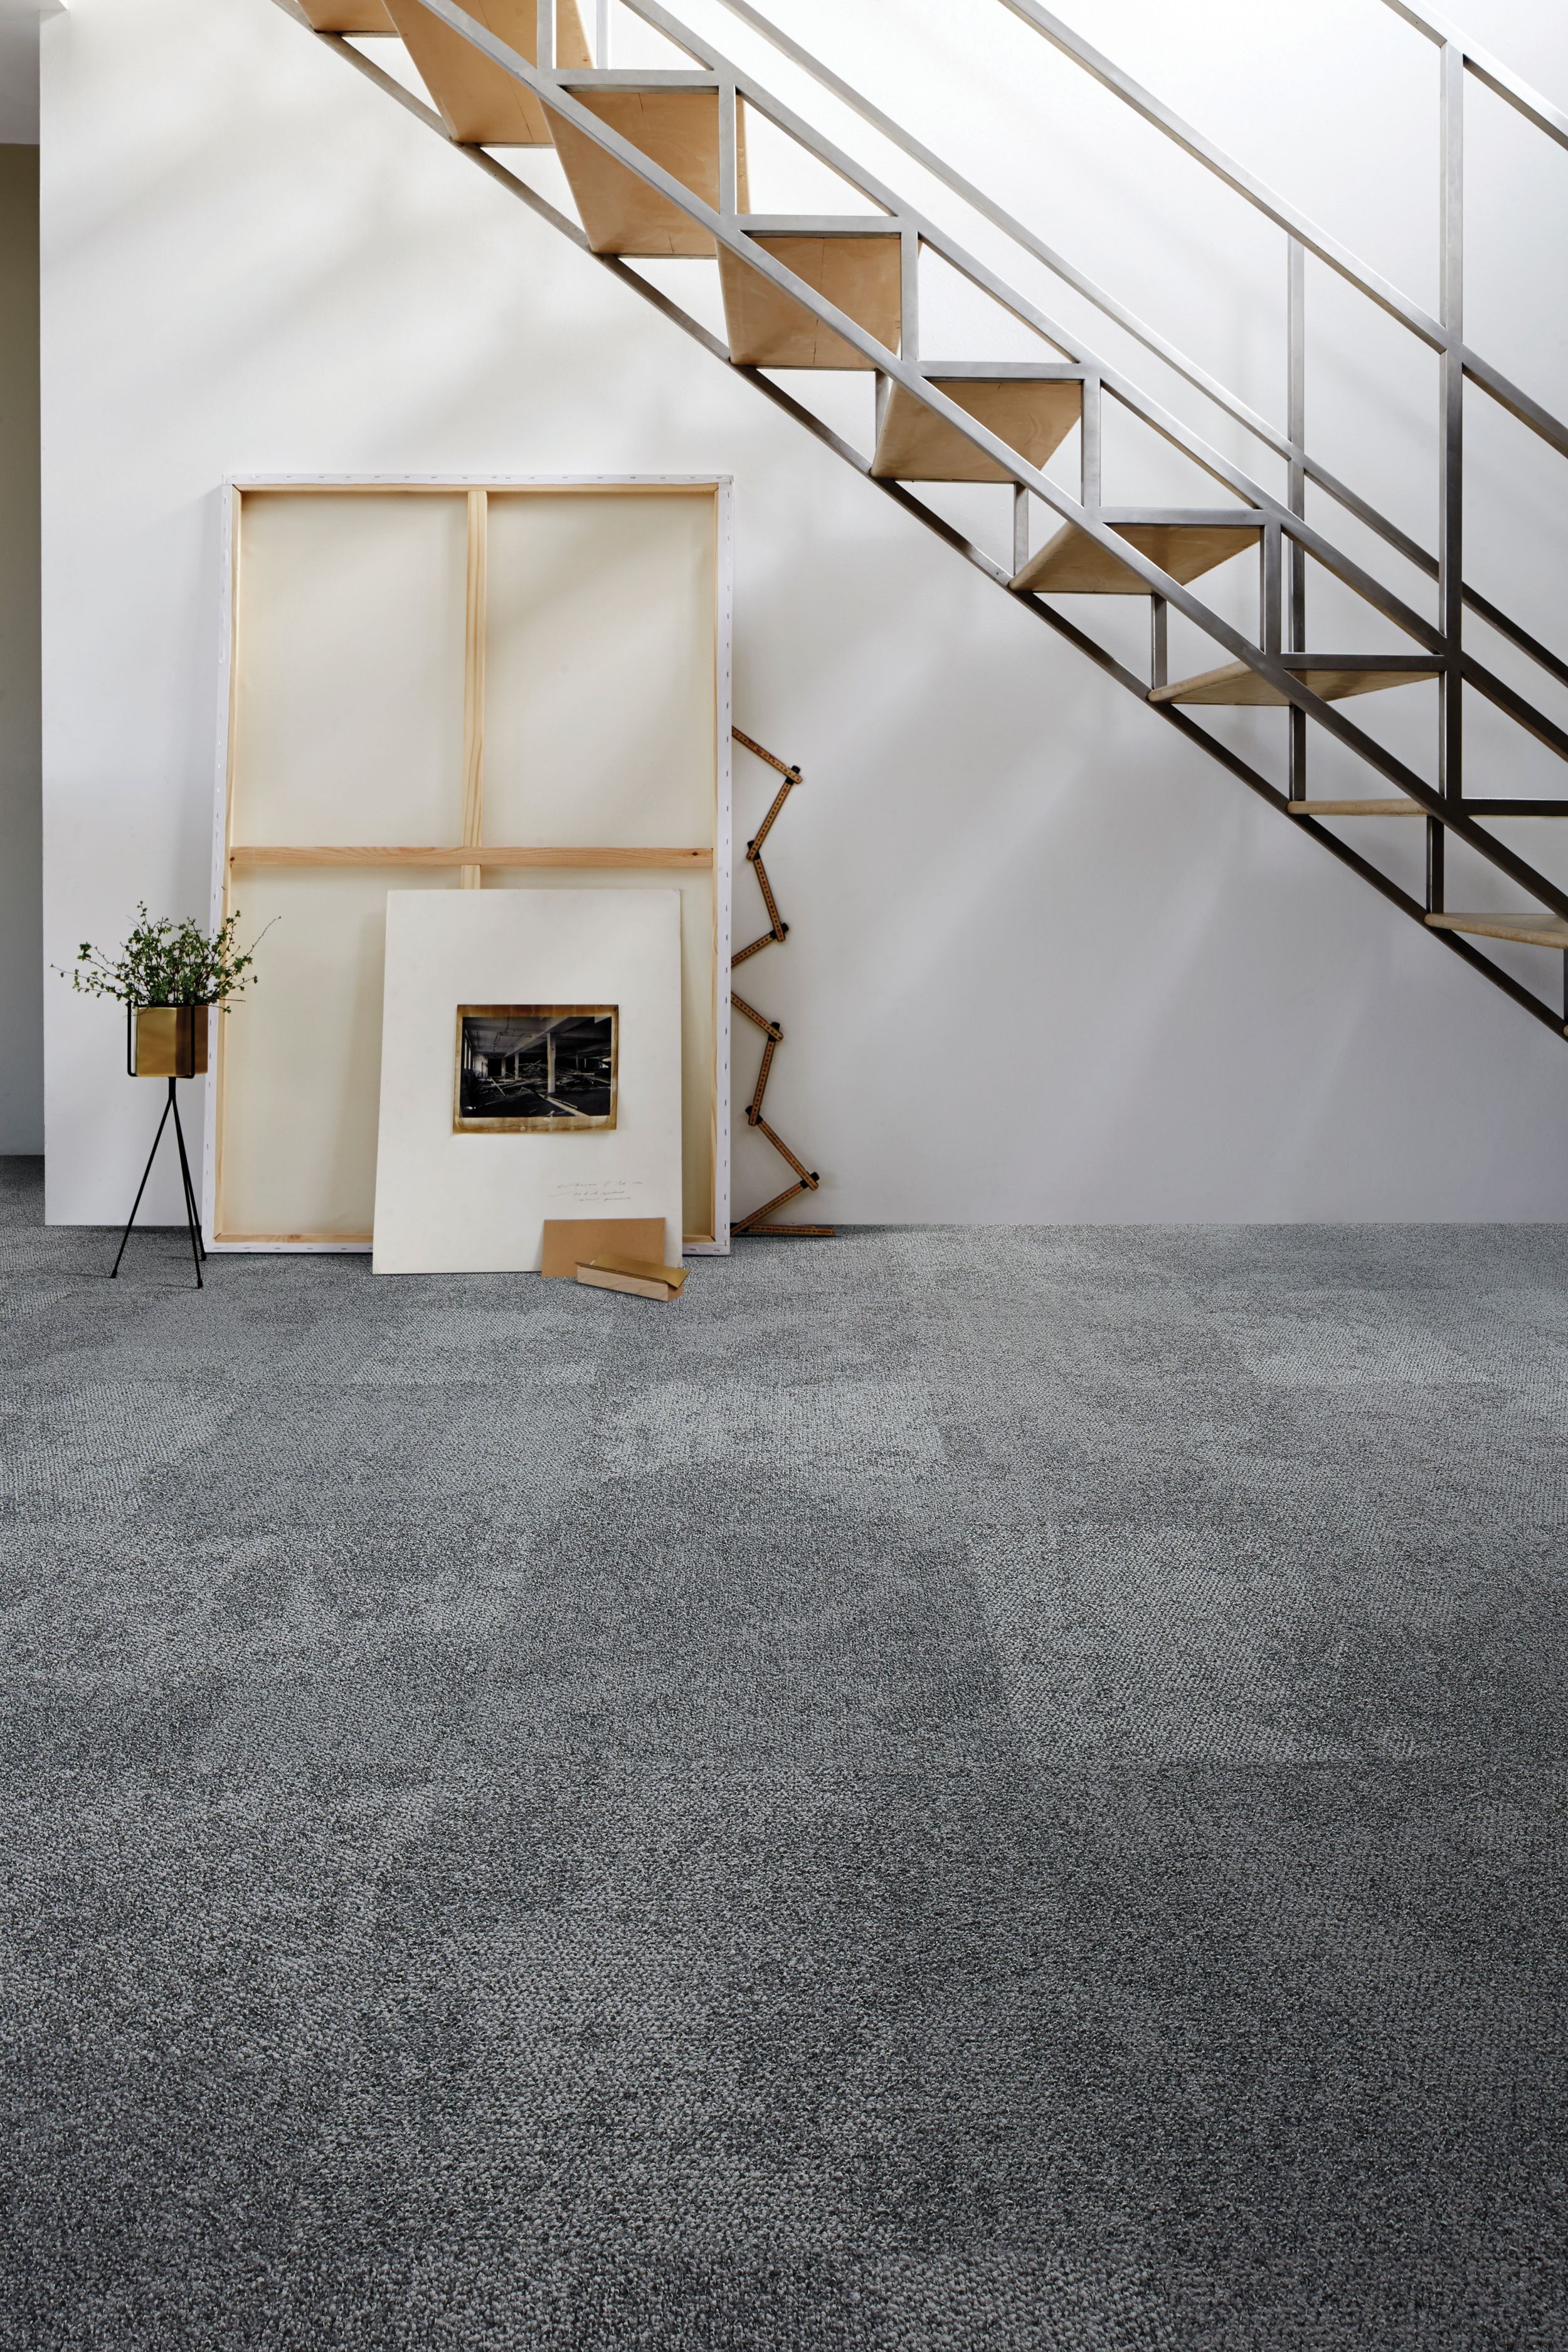 Interface Composure carpet tile with stairs in background numéro d’image 6